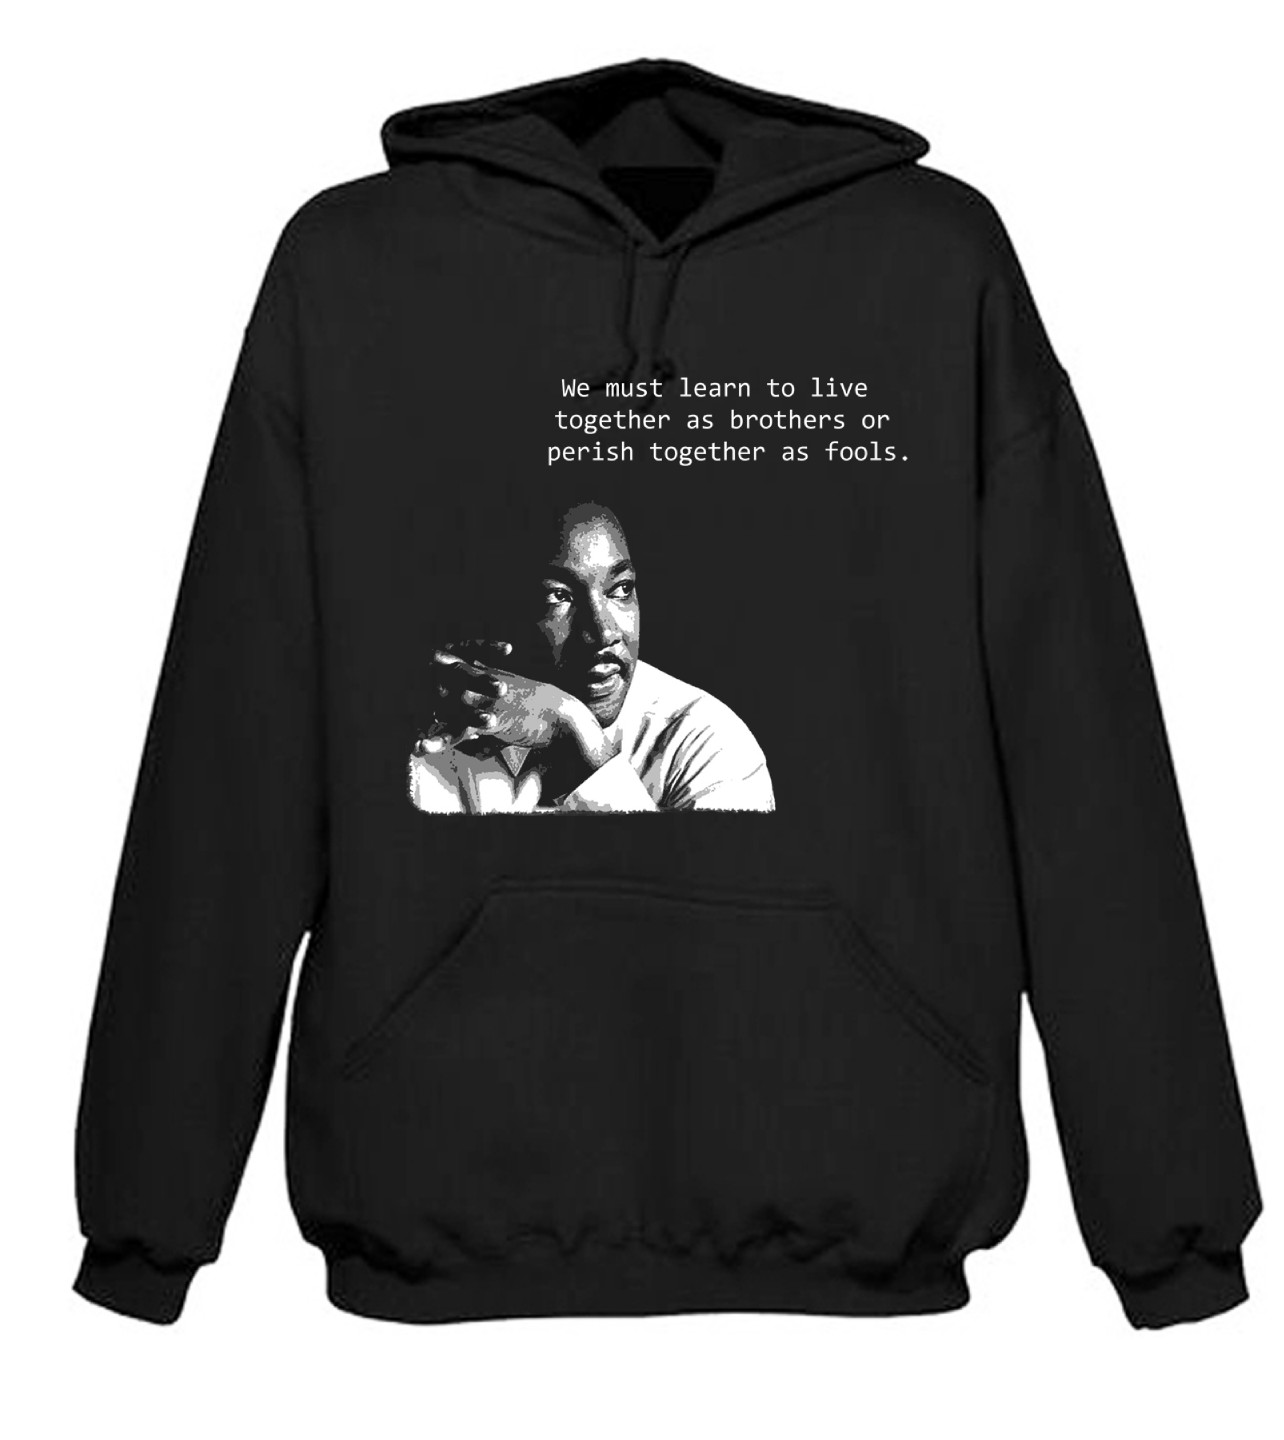 MARTIN LUTHER KING QUOTE HOODIE - Civil Rights Malcolm X T-Shirt - Size ...